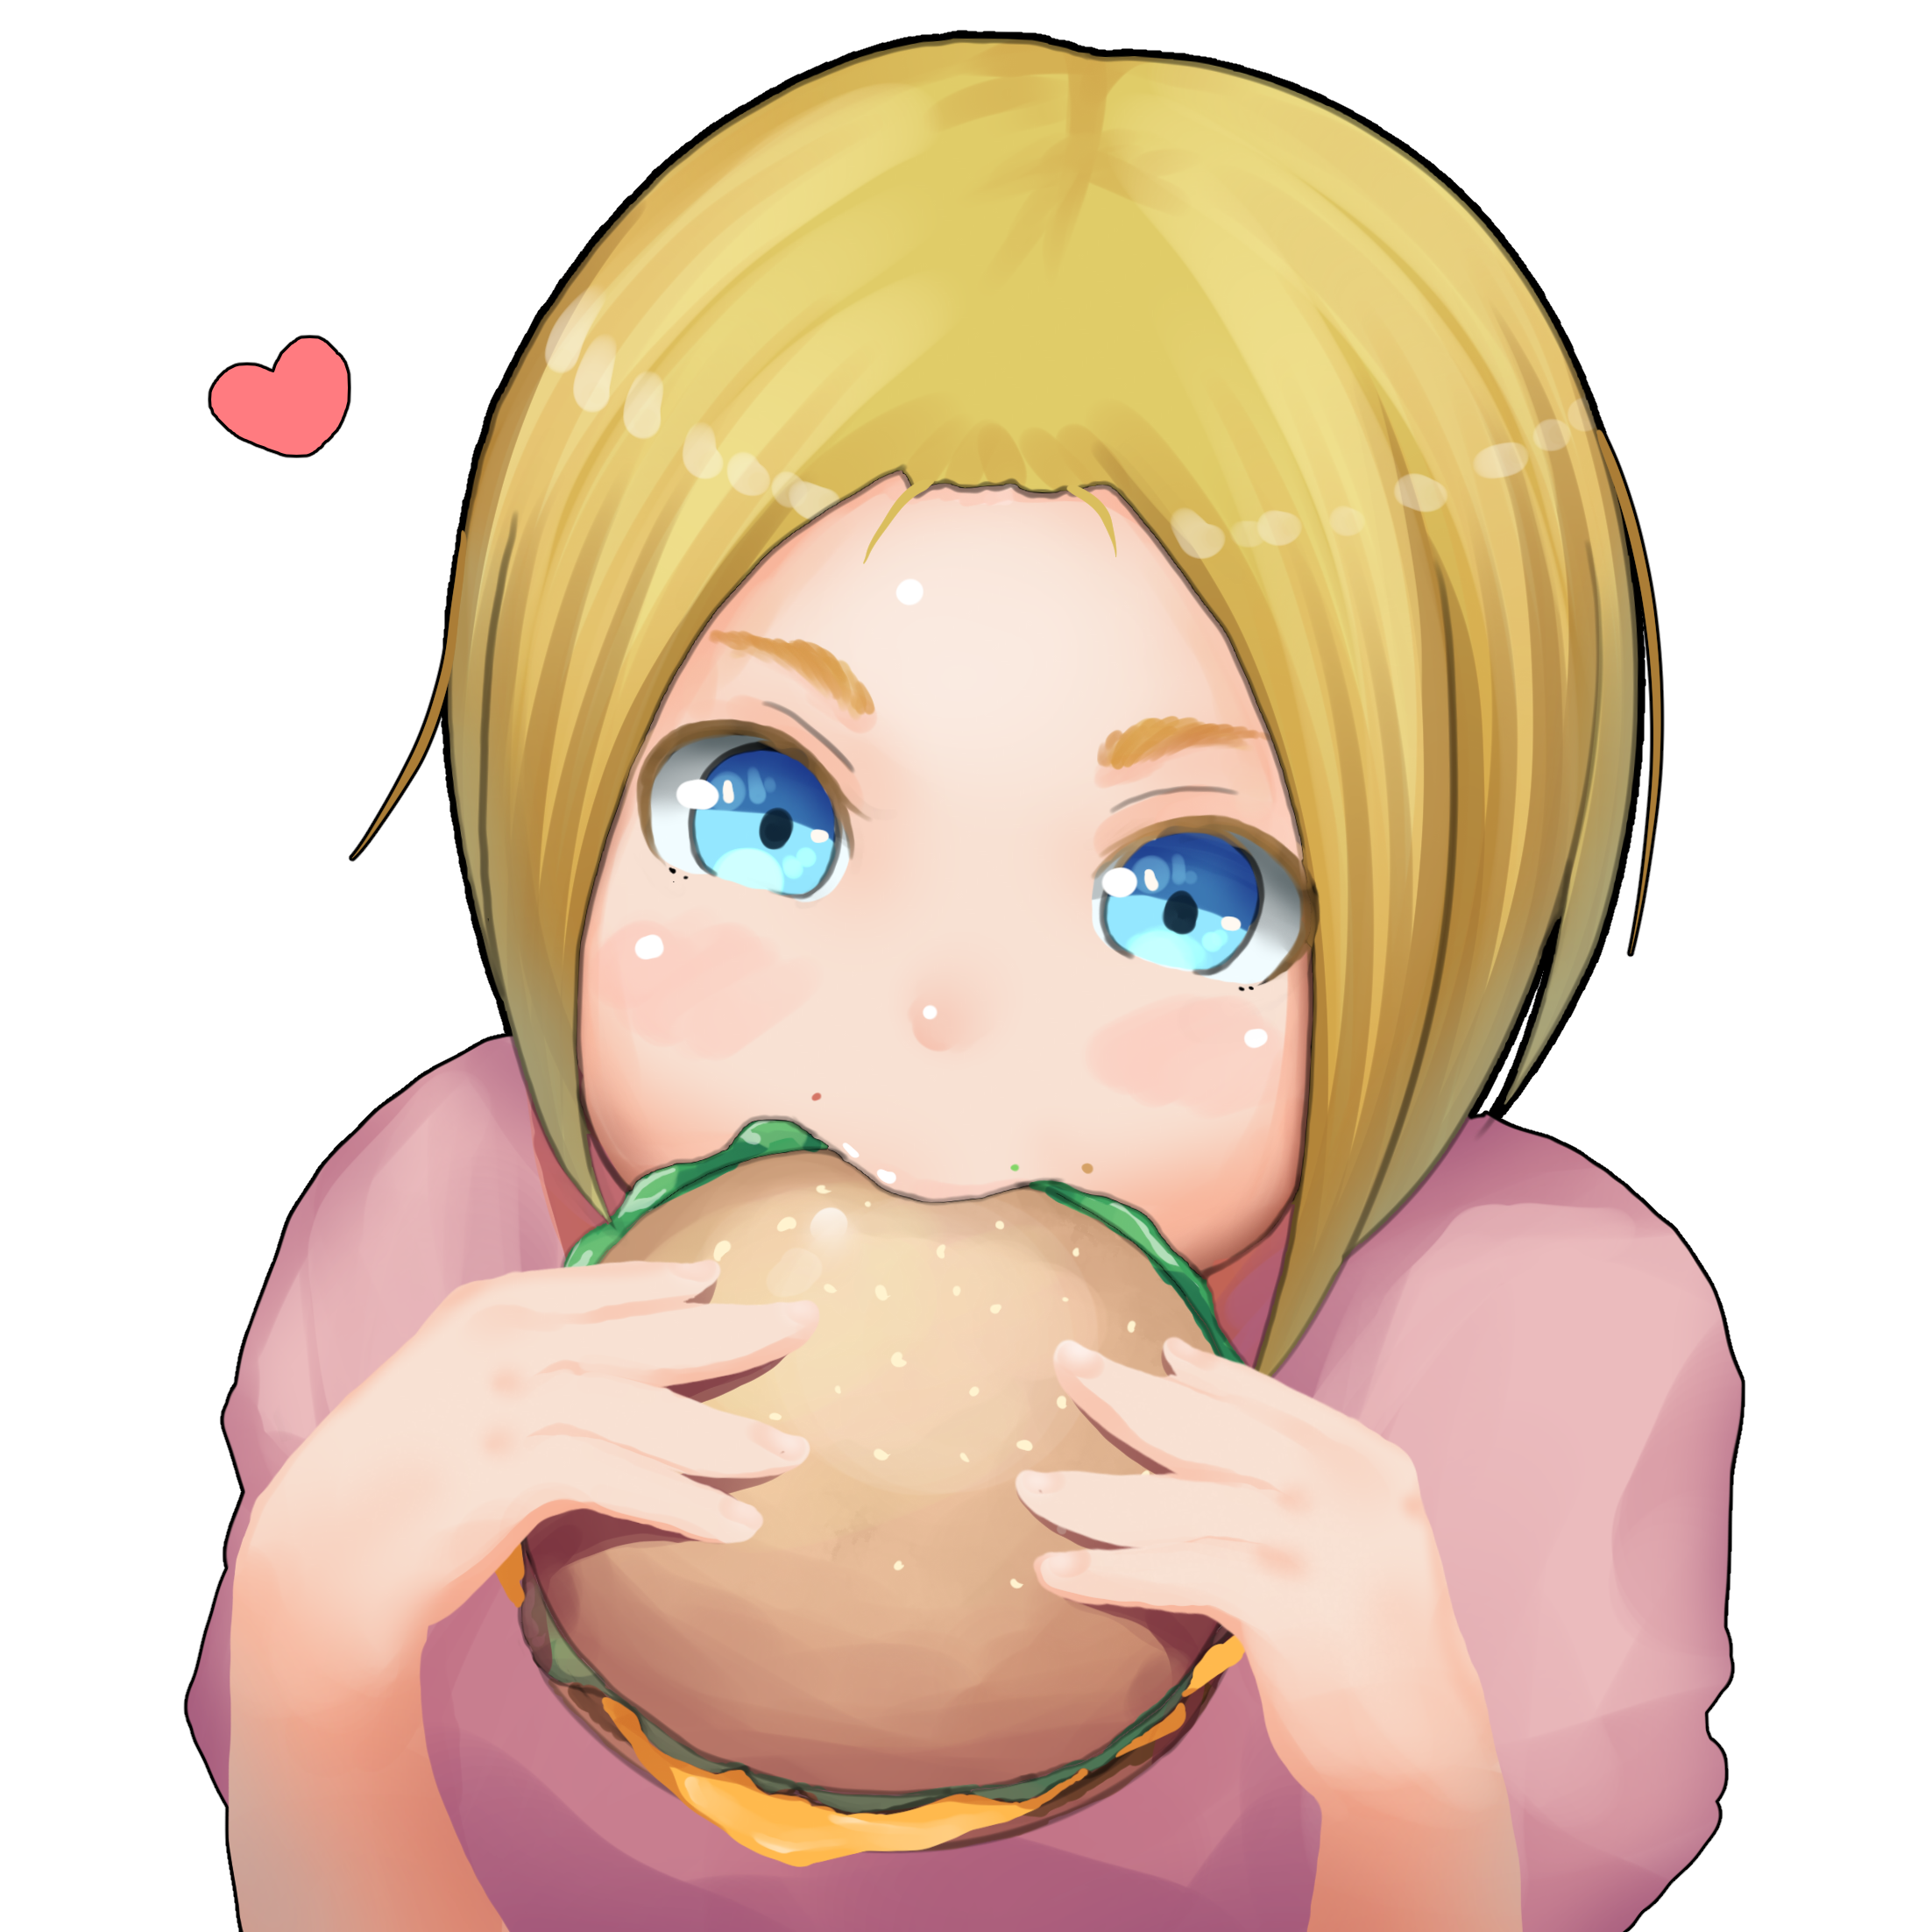 Download Anime Girl eating Burger PNG Image for Free